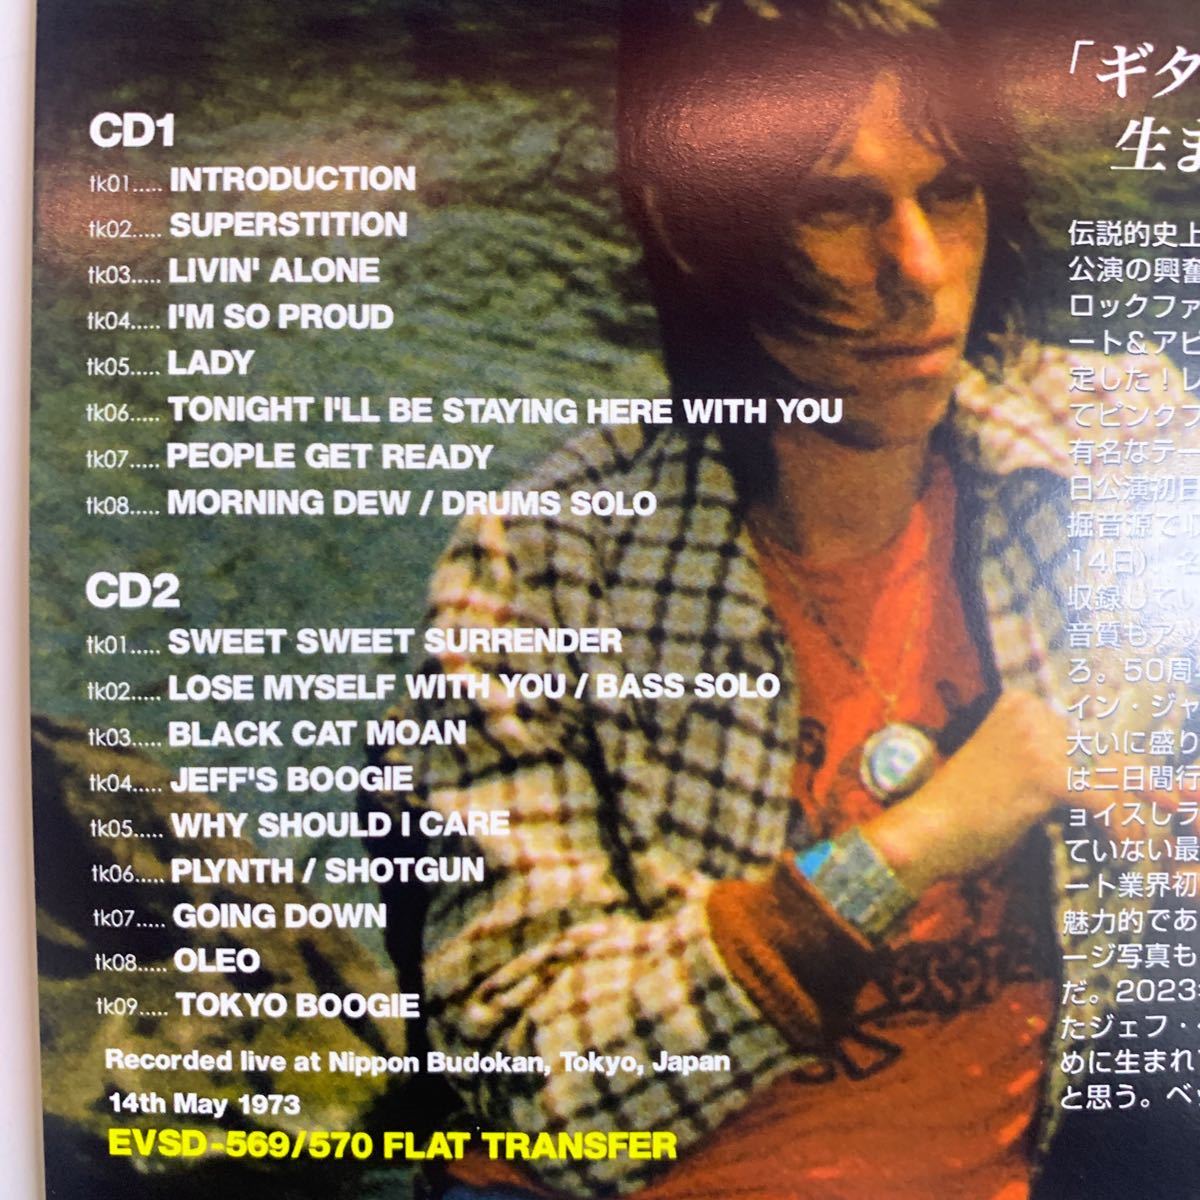 BECK, BOGERT & APPICE BBA / JEFF BECK GROUP / LIVE IN TOKYO 2CD 100セット限定盤！ボックスセットリリースに伴う販売促進用アイテム！の画像3